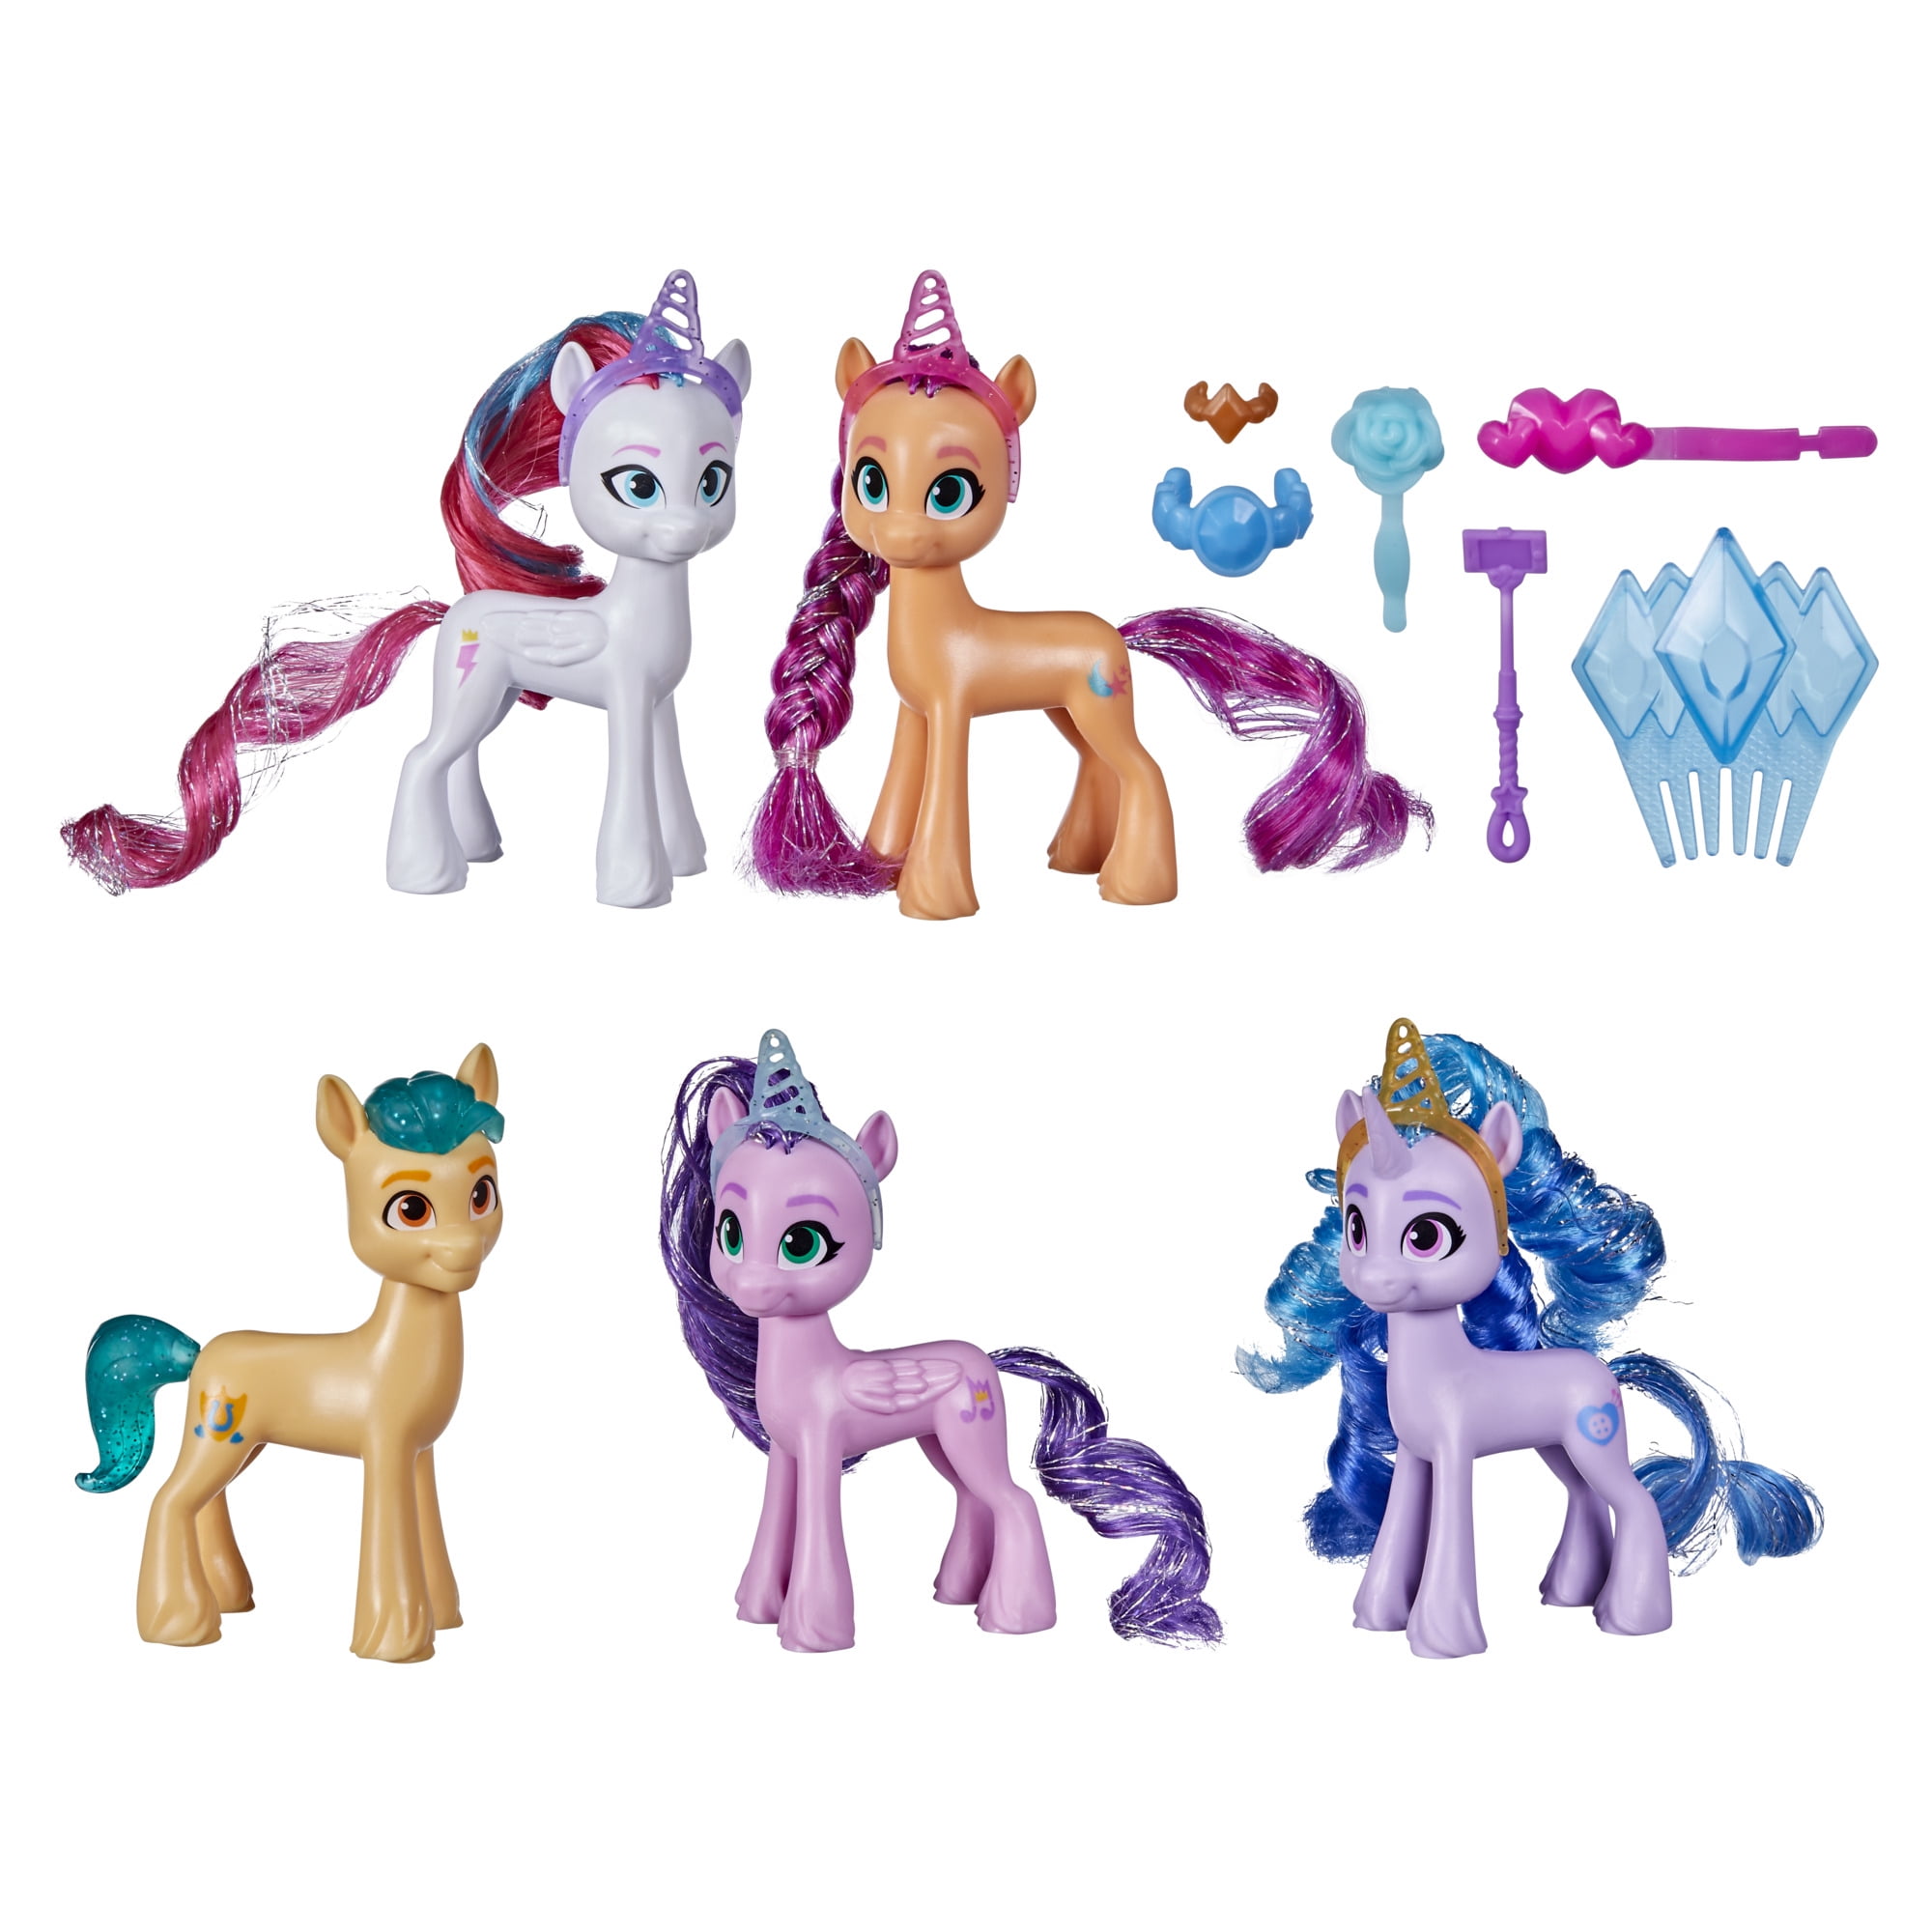 MY LITTLE PONY DESIGN KIDS GIRLS BEDROOMS ACCESSORIES Choose 1 or More 